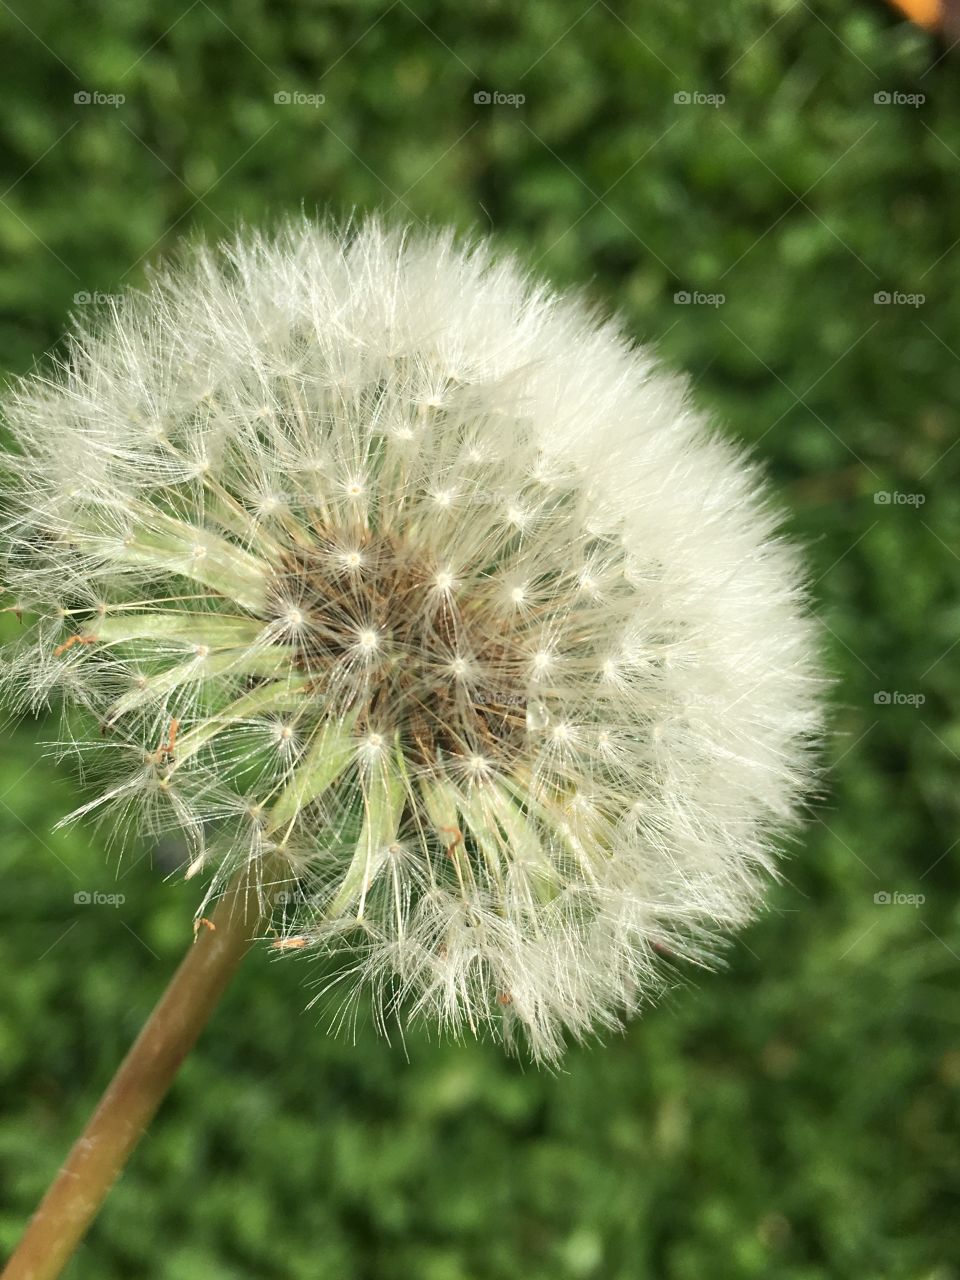 The delicate castle protects all within it.  A dandelion waiting for the first wisp to carry it into the wind 